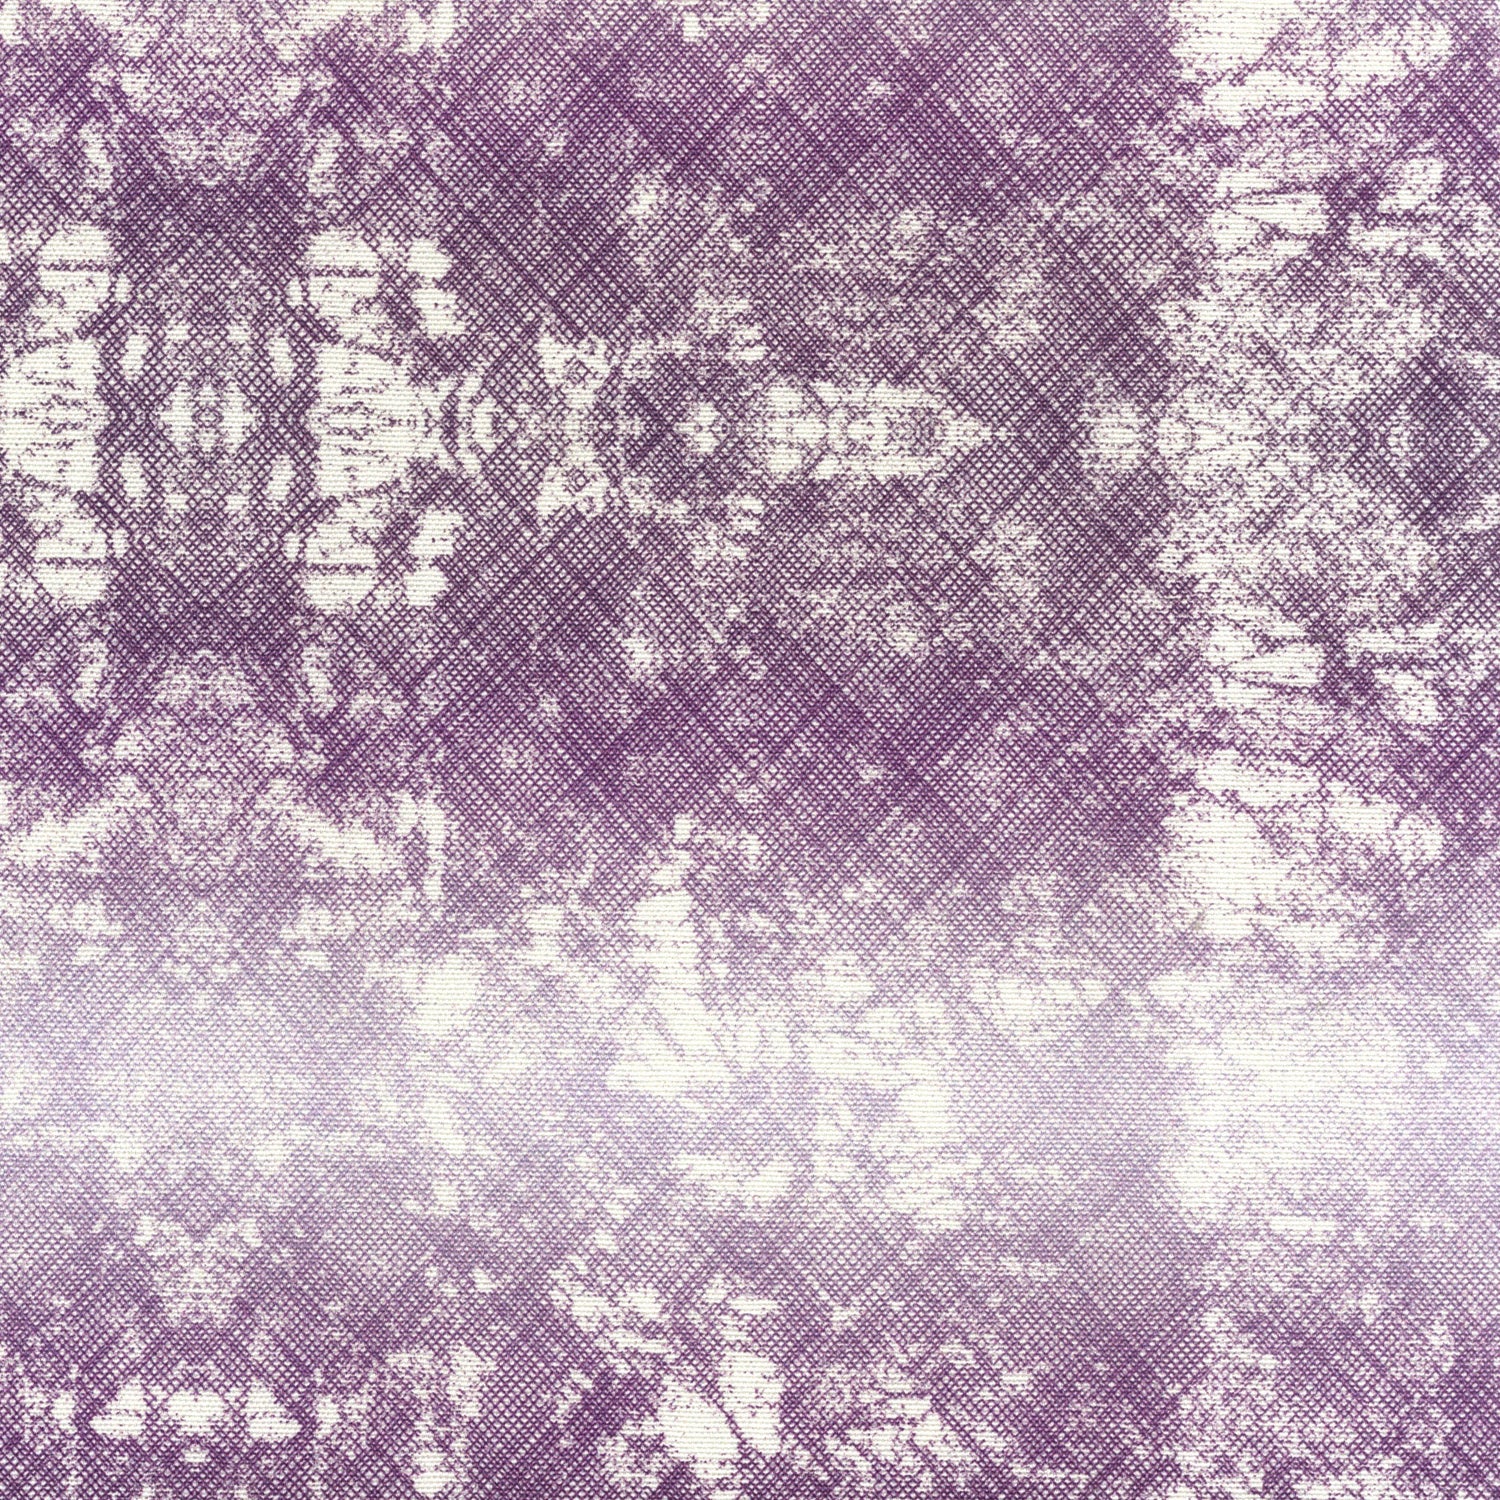 Detail of fabric in a textural ombré print in purple on a cream field.